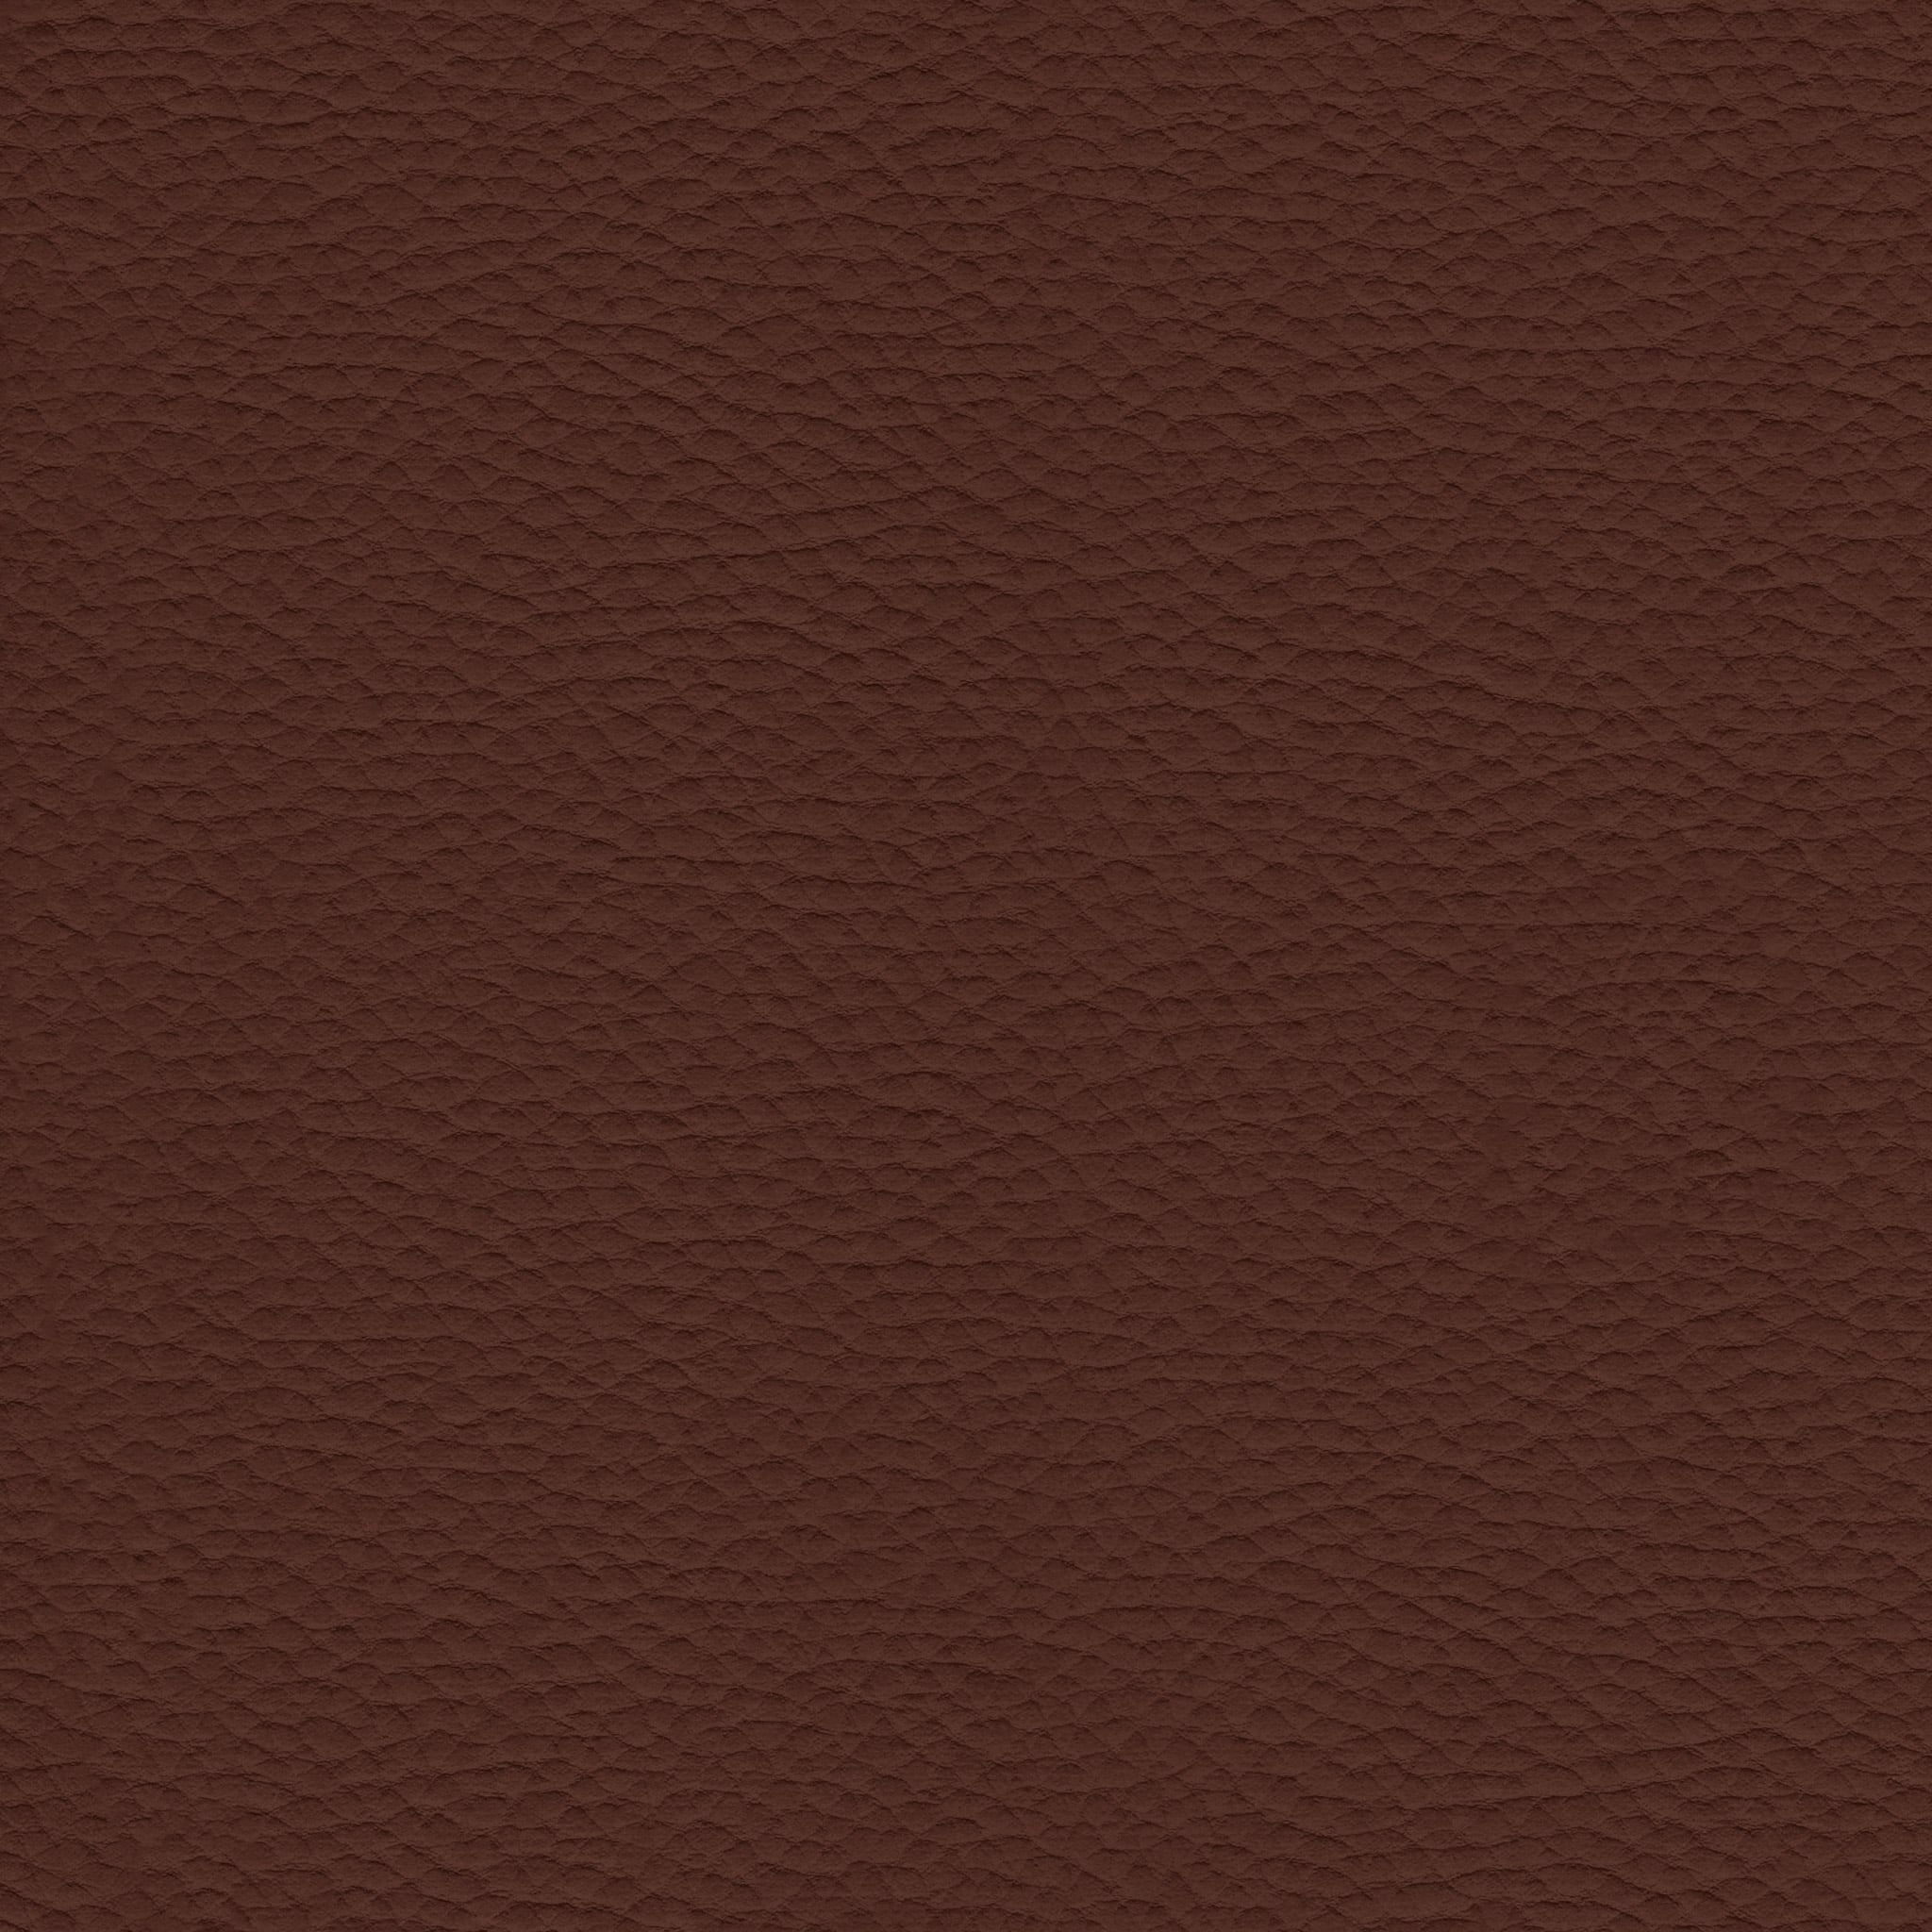 Chocolate Brown Leather